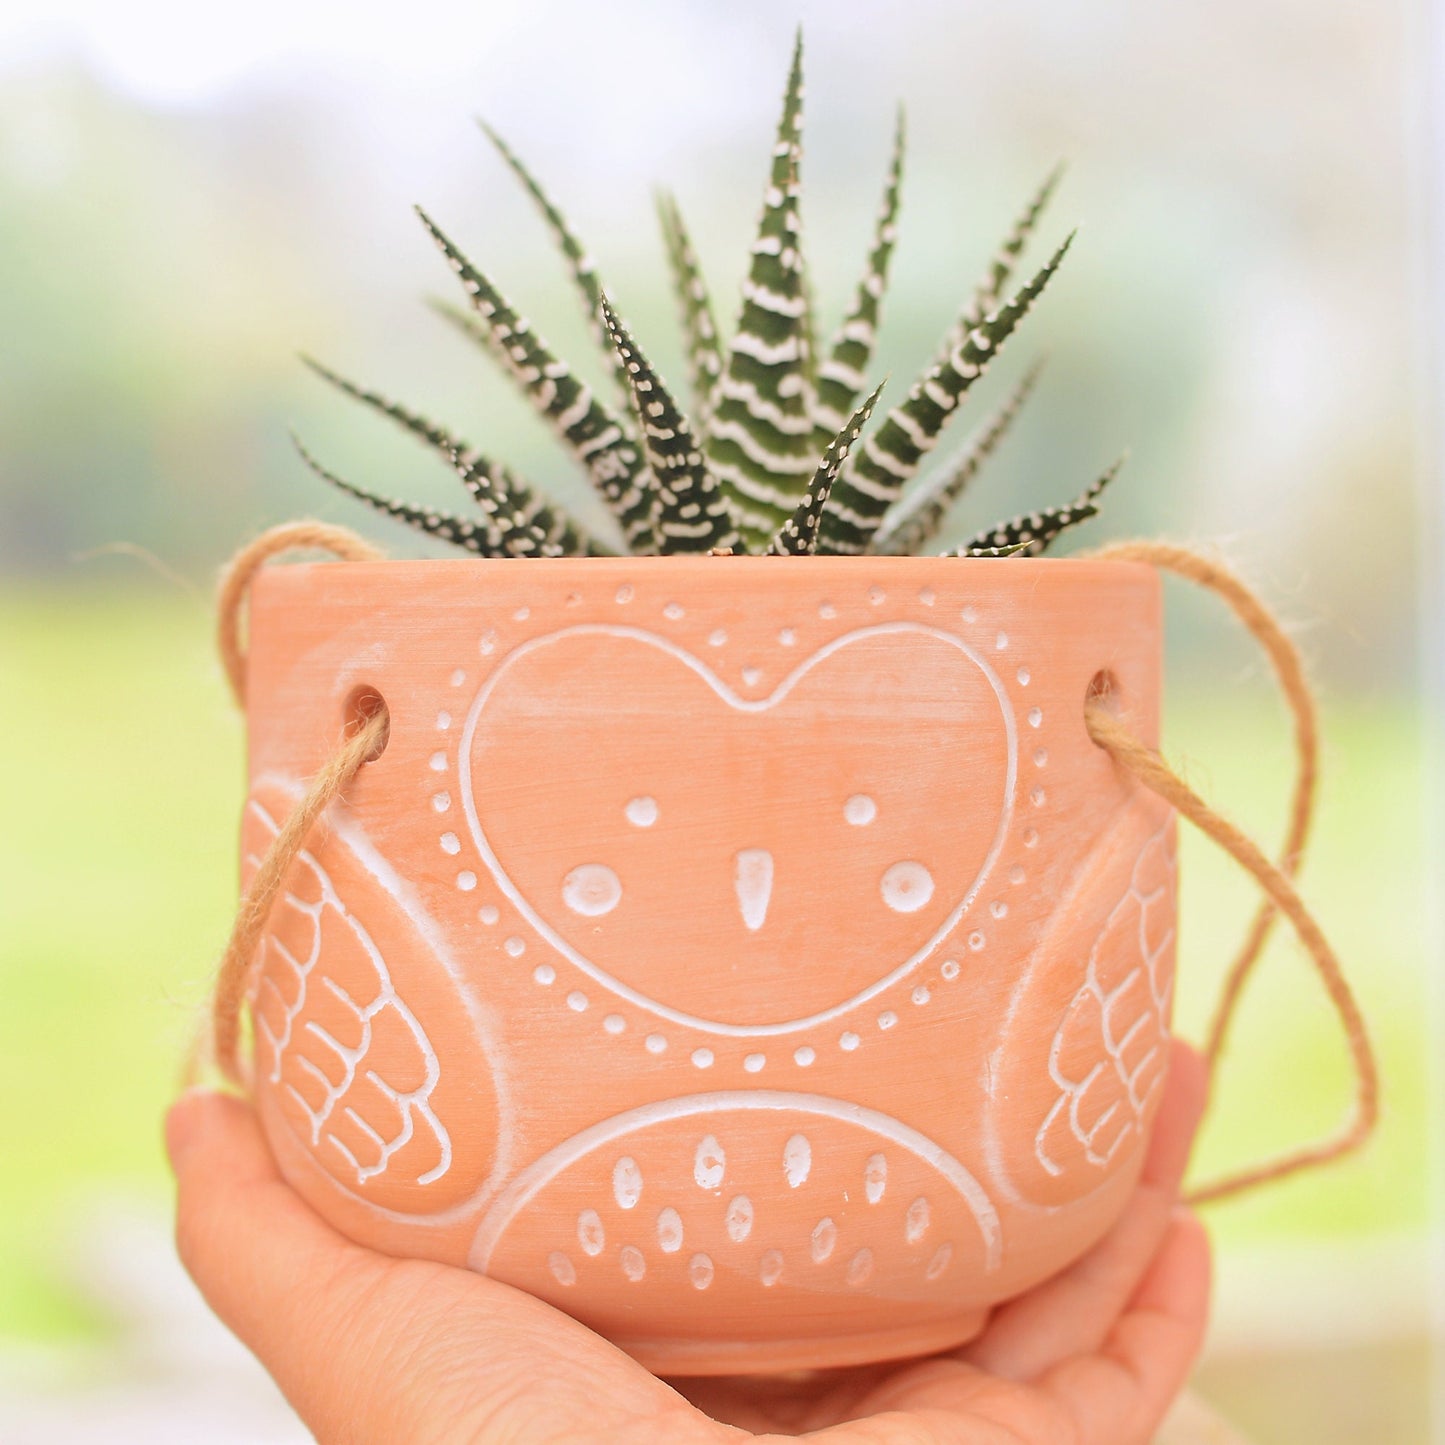 Large Terracotta Hanging Owl Planter With Choice Of Plant